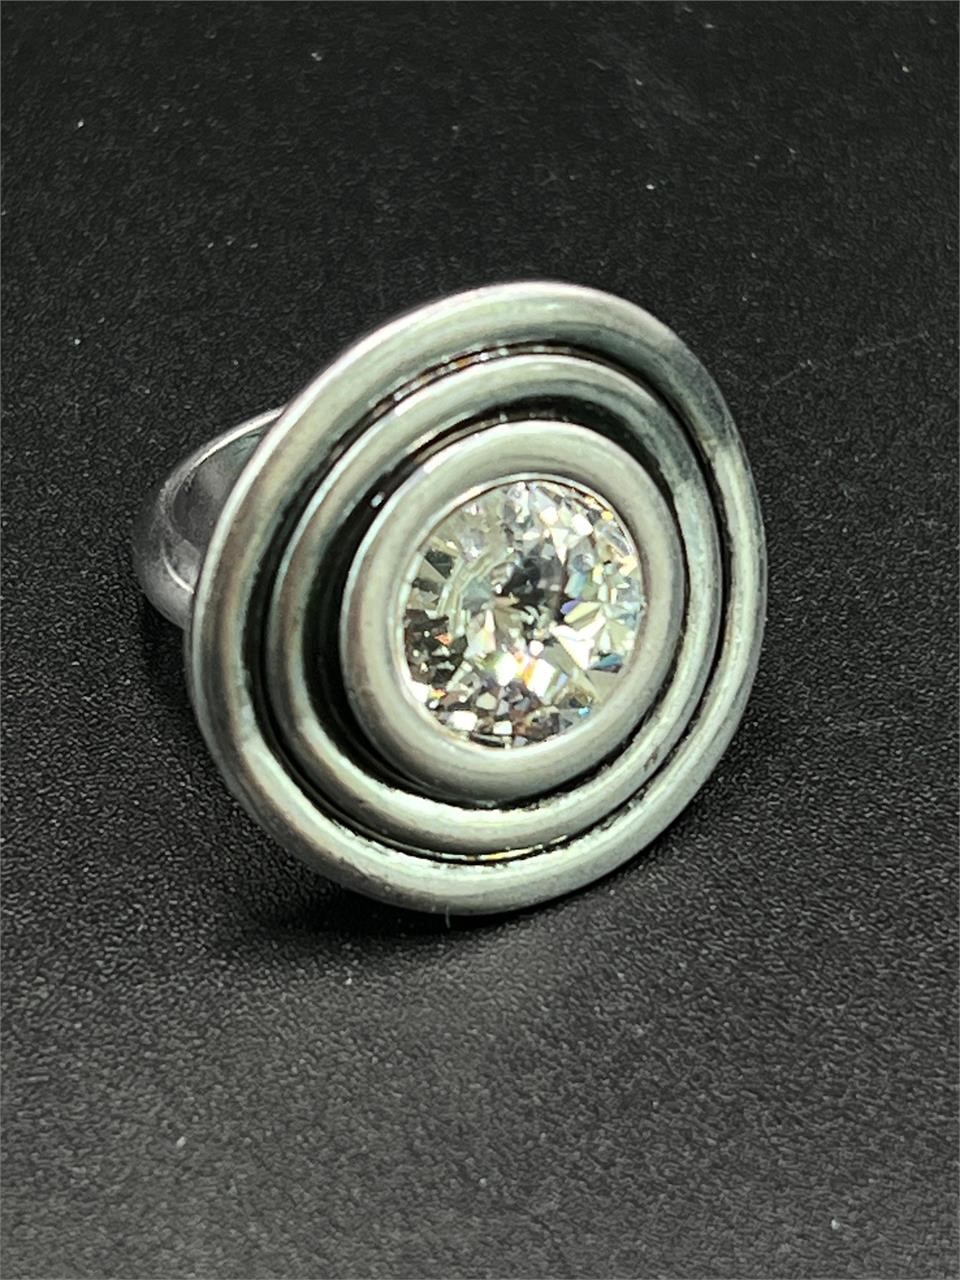 Premier designs size 5 silver toned ring